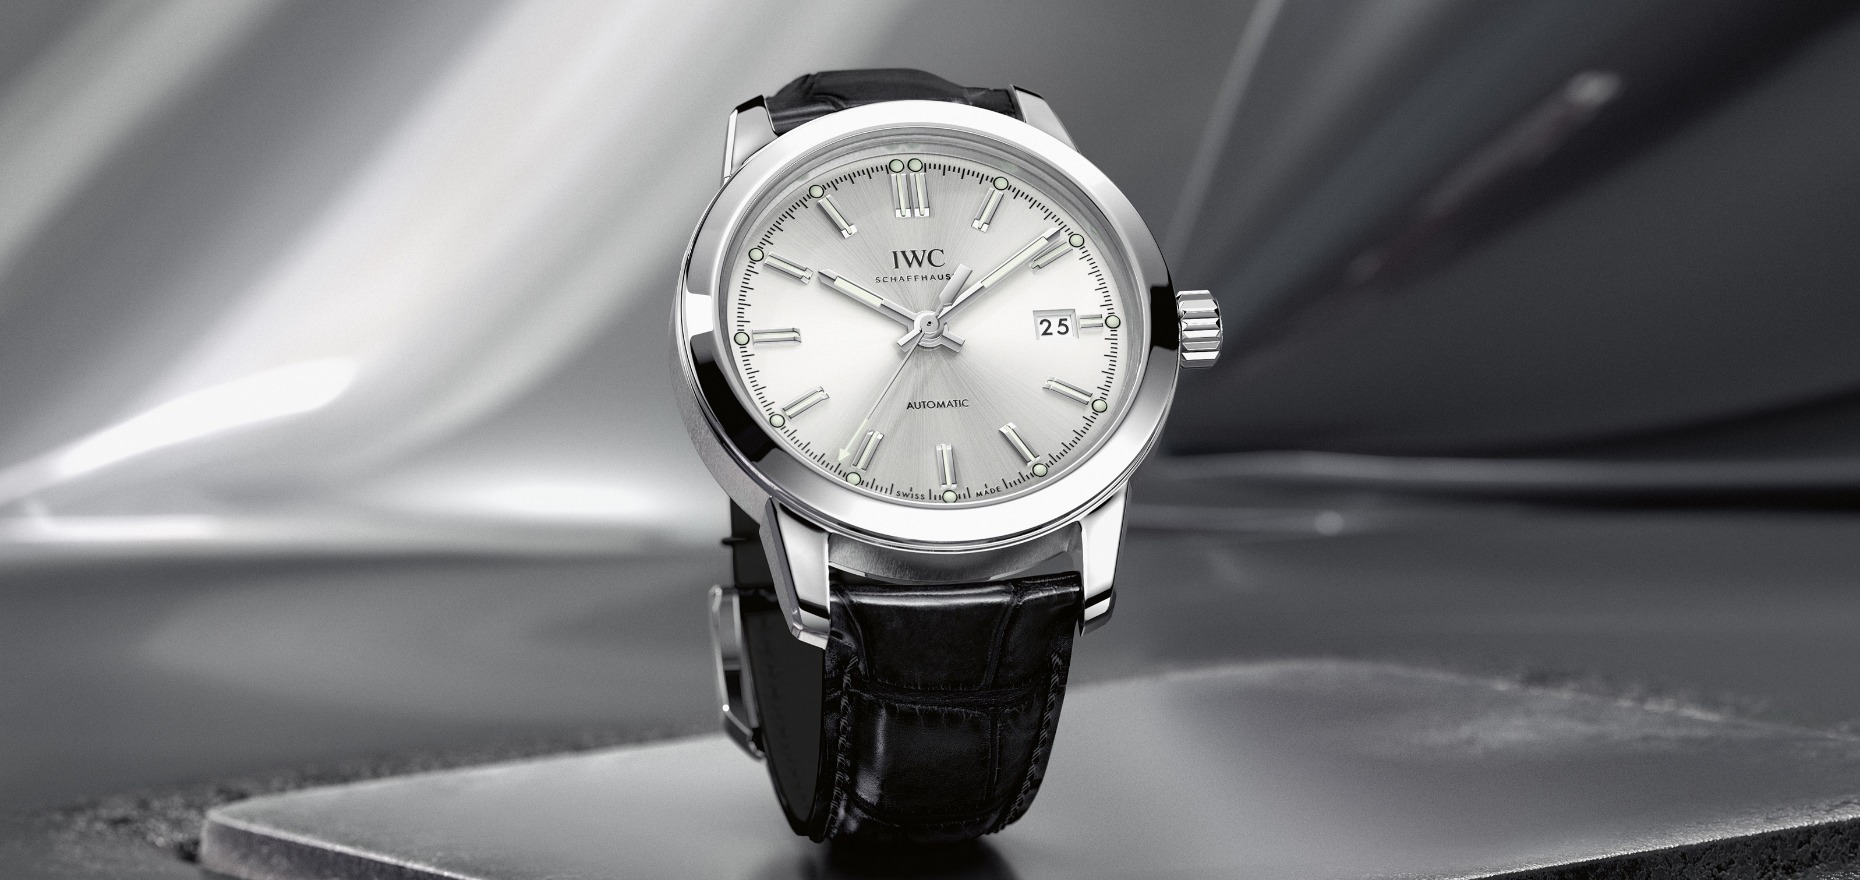 IWC Ingenieur: The anti-magnetic watch for scientists